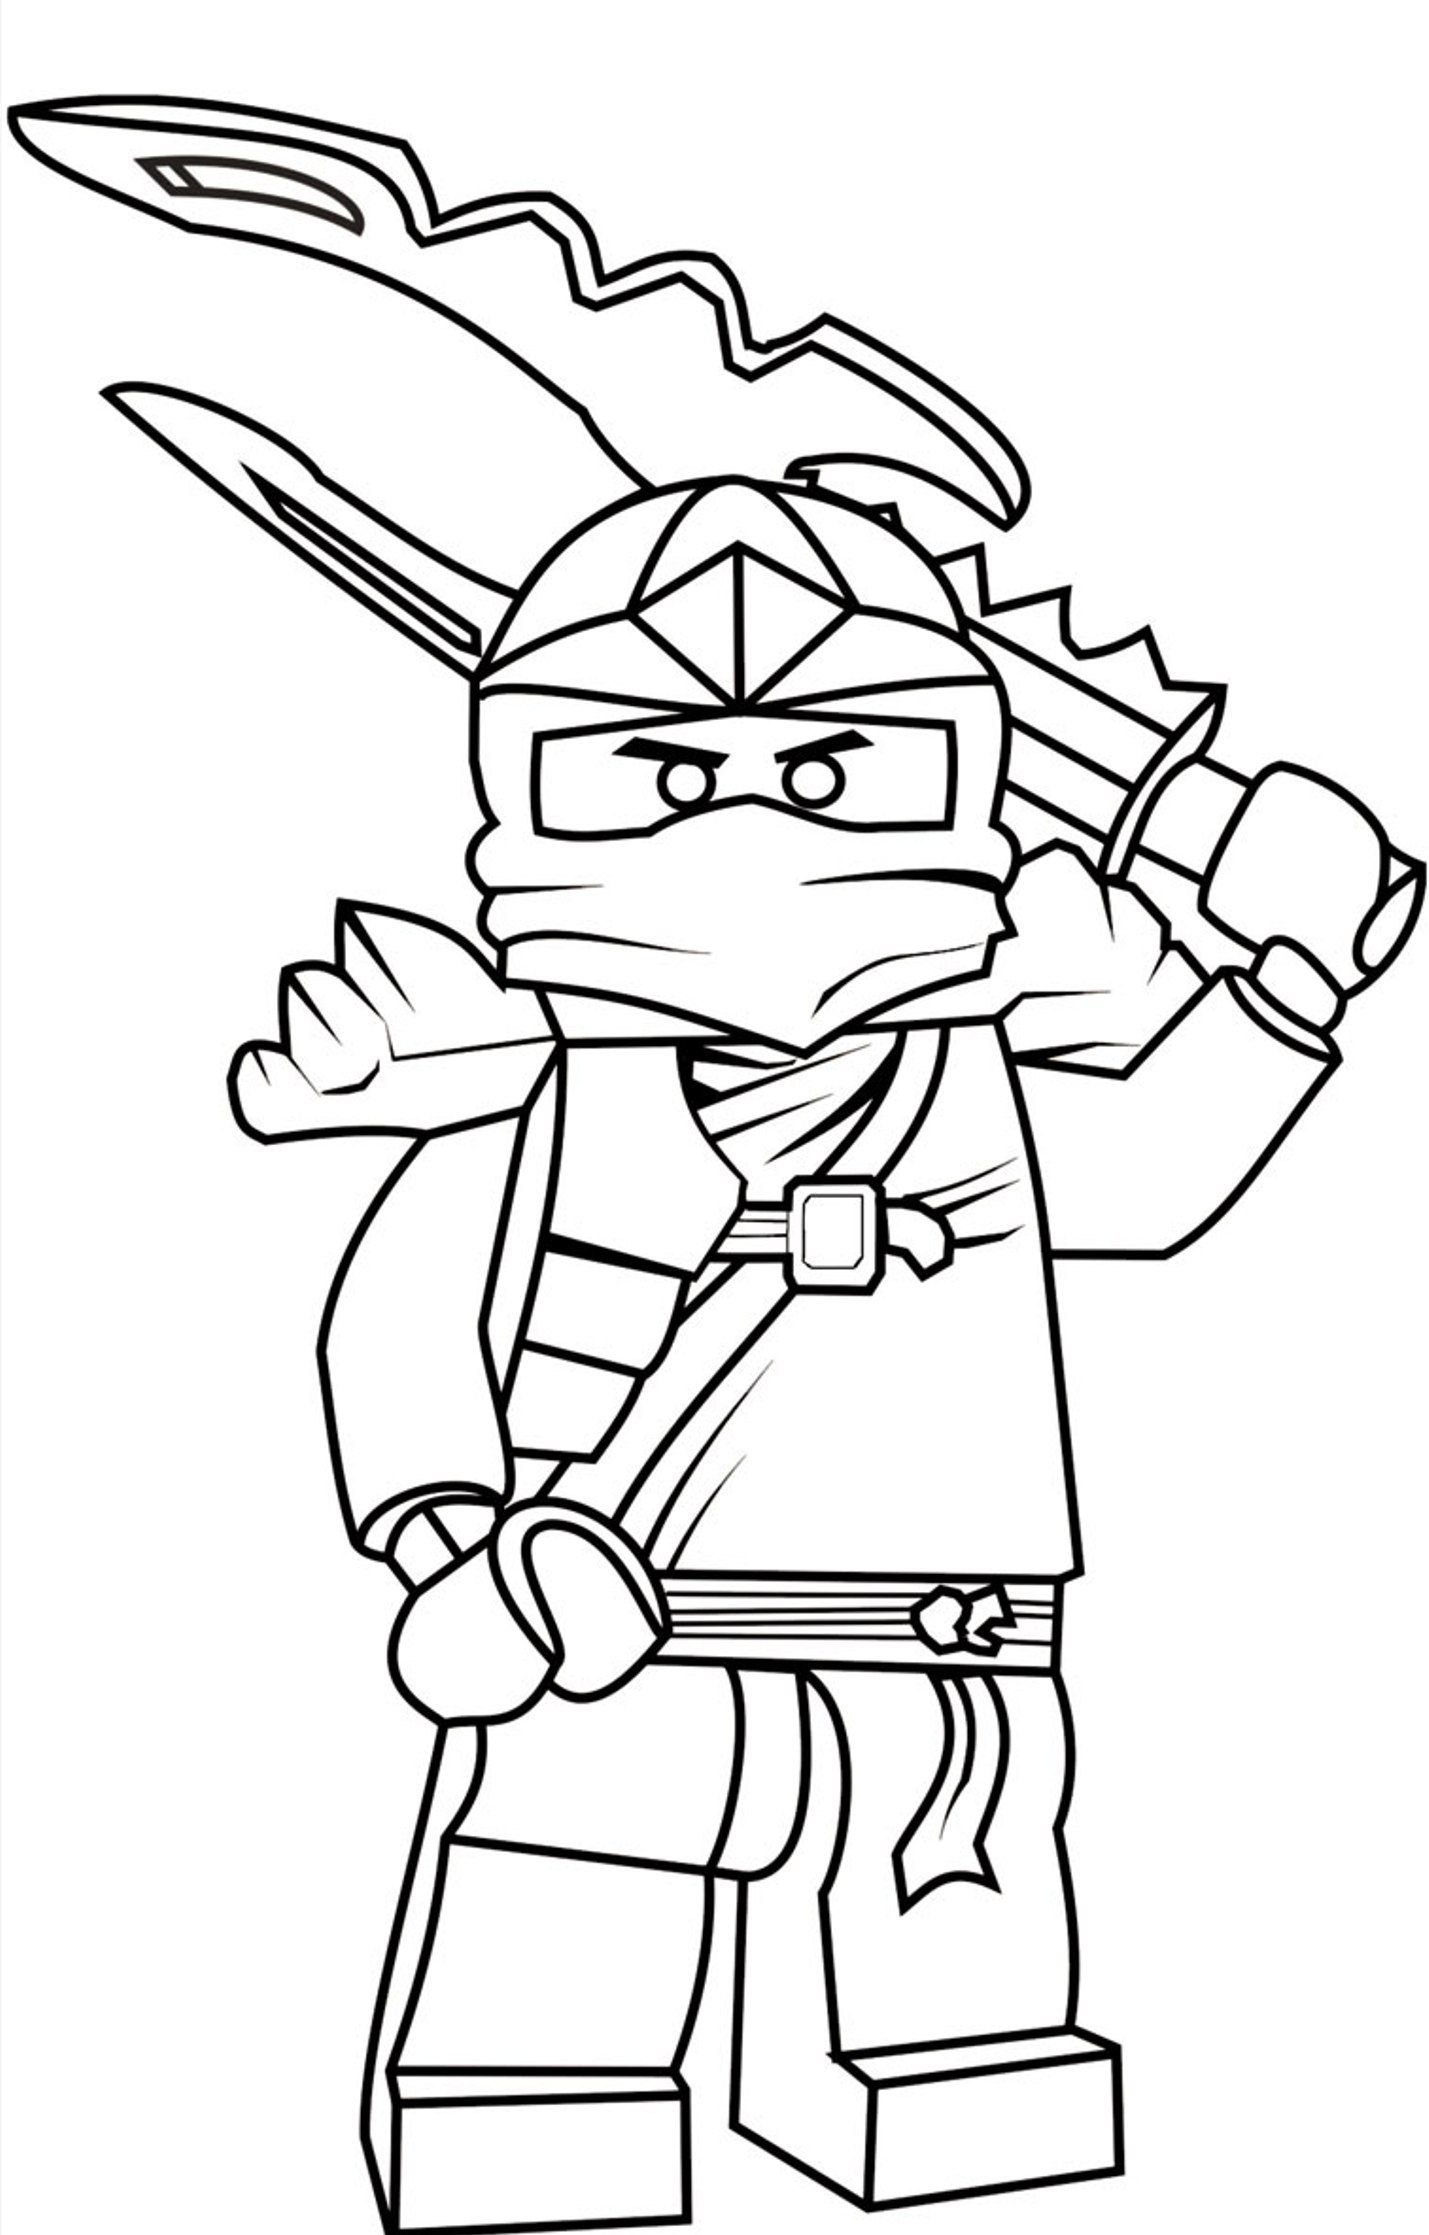 Cartoon Network Ninjago Coloring Pages - Coloring Pages For All Ages